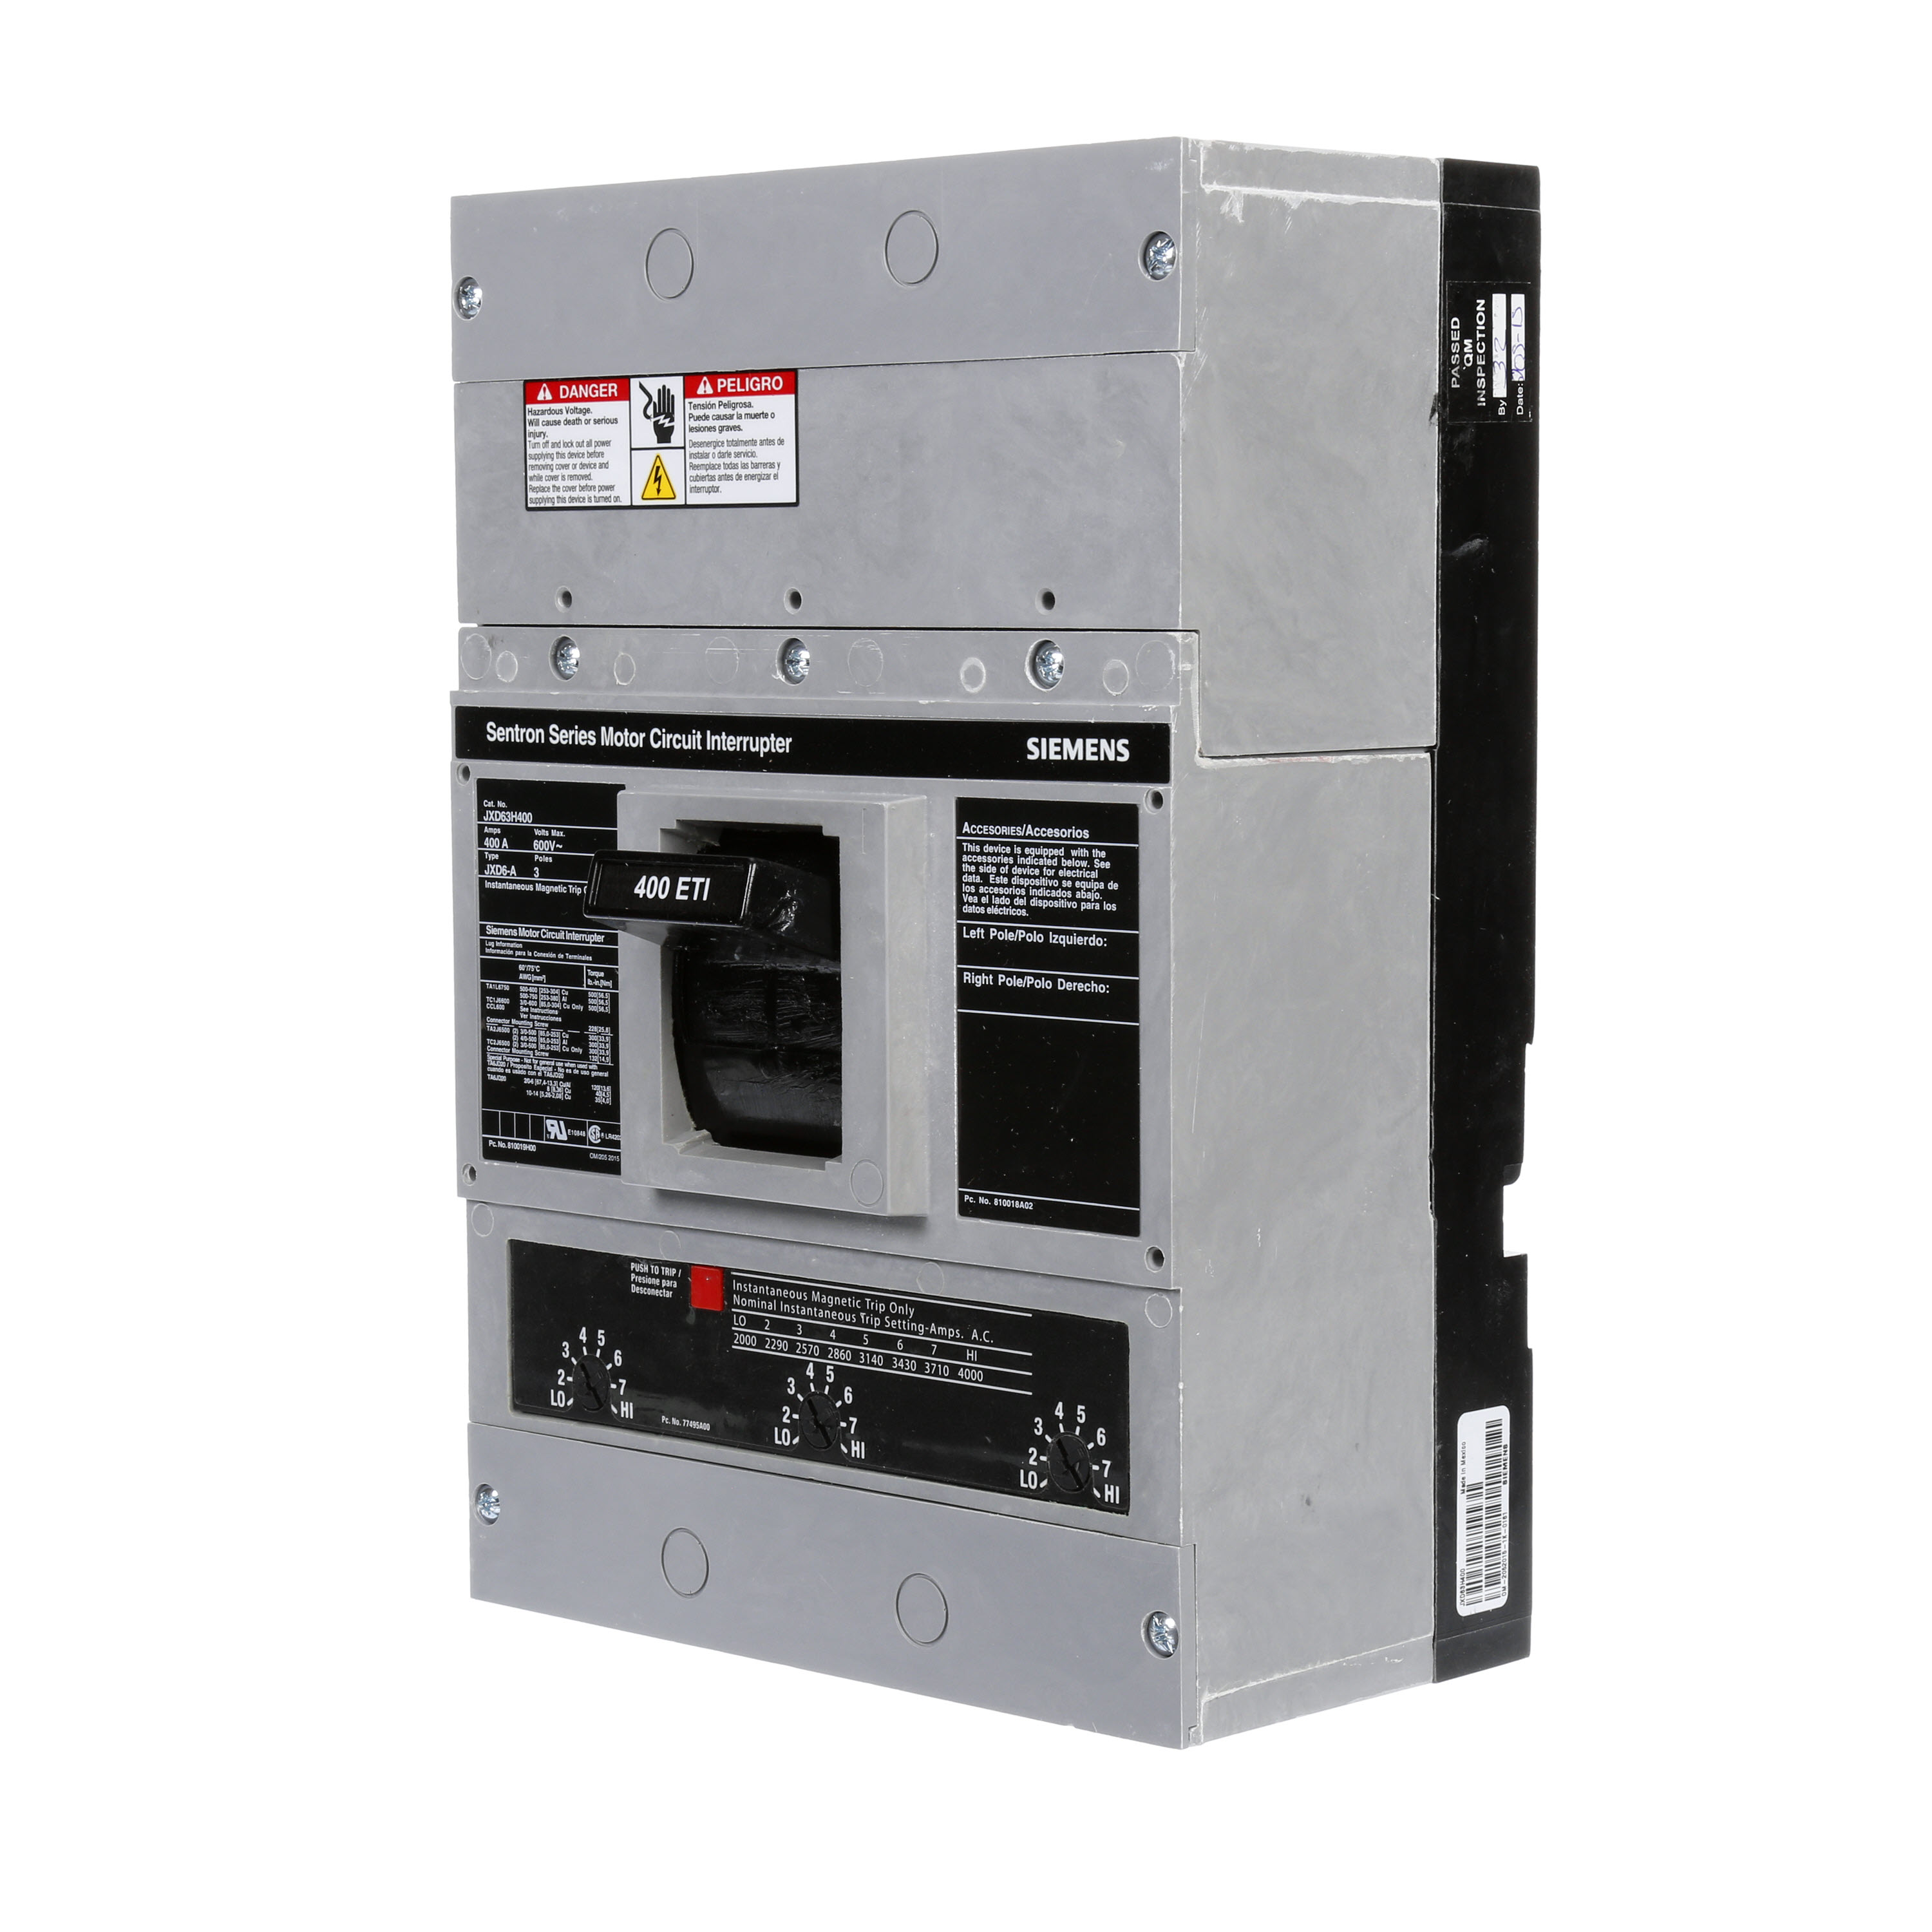 SIEMENS LOW VOLTAGE SENTRON MOLDED CASE CIRCUIT BREAKER WITH MAGNETIC TRIP ONLYUNIT. HIGH INSTANTANEOUS RANGE ETI BREAKER JD FRAME WITHSTANDARD BREAKING CAPACITY AND NON INTERCHANGEABLE TRIP. MEETS UL 489 /IEC 60947-2 STANDARDS. 400A 3-POLE BREAKER (25KAIC AT 600V) (35KAIC AT480V). SPECIAL FEATURES NO LUGS INSTALLED.DIMENSIONS (W x H x D) IN 7.5 x 11 x 4.___________________________________ _____________________________________